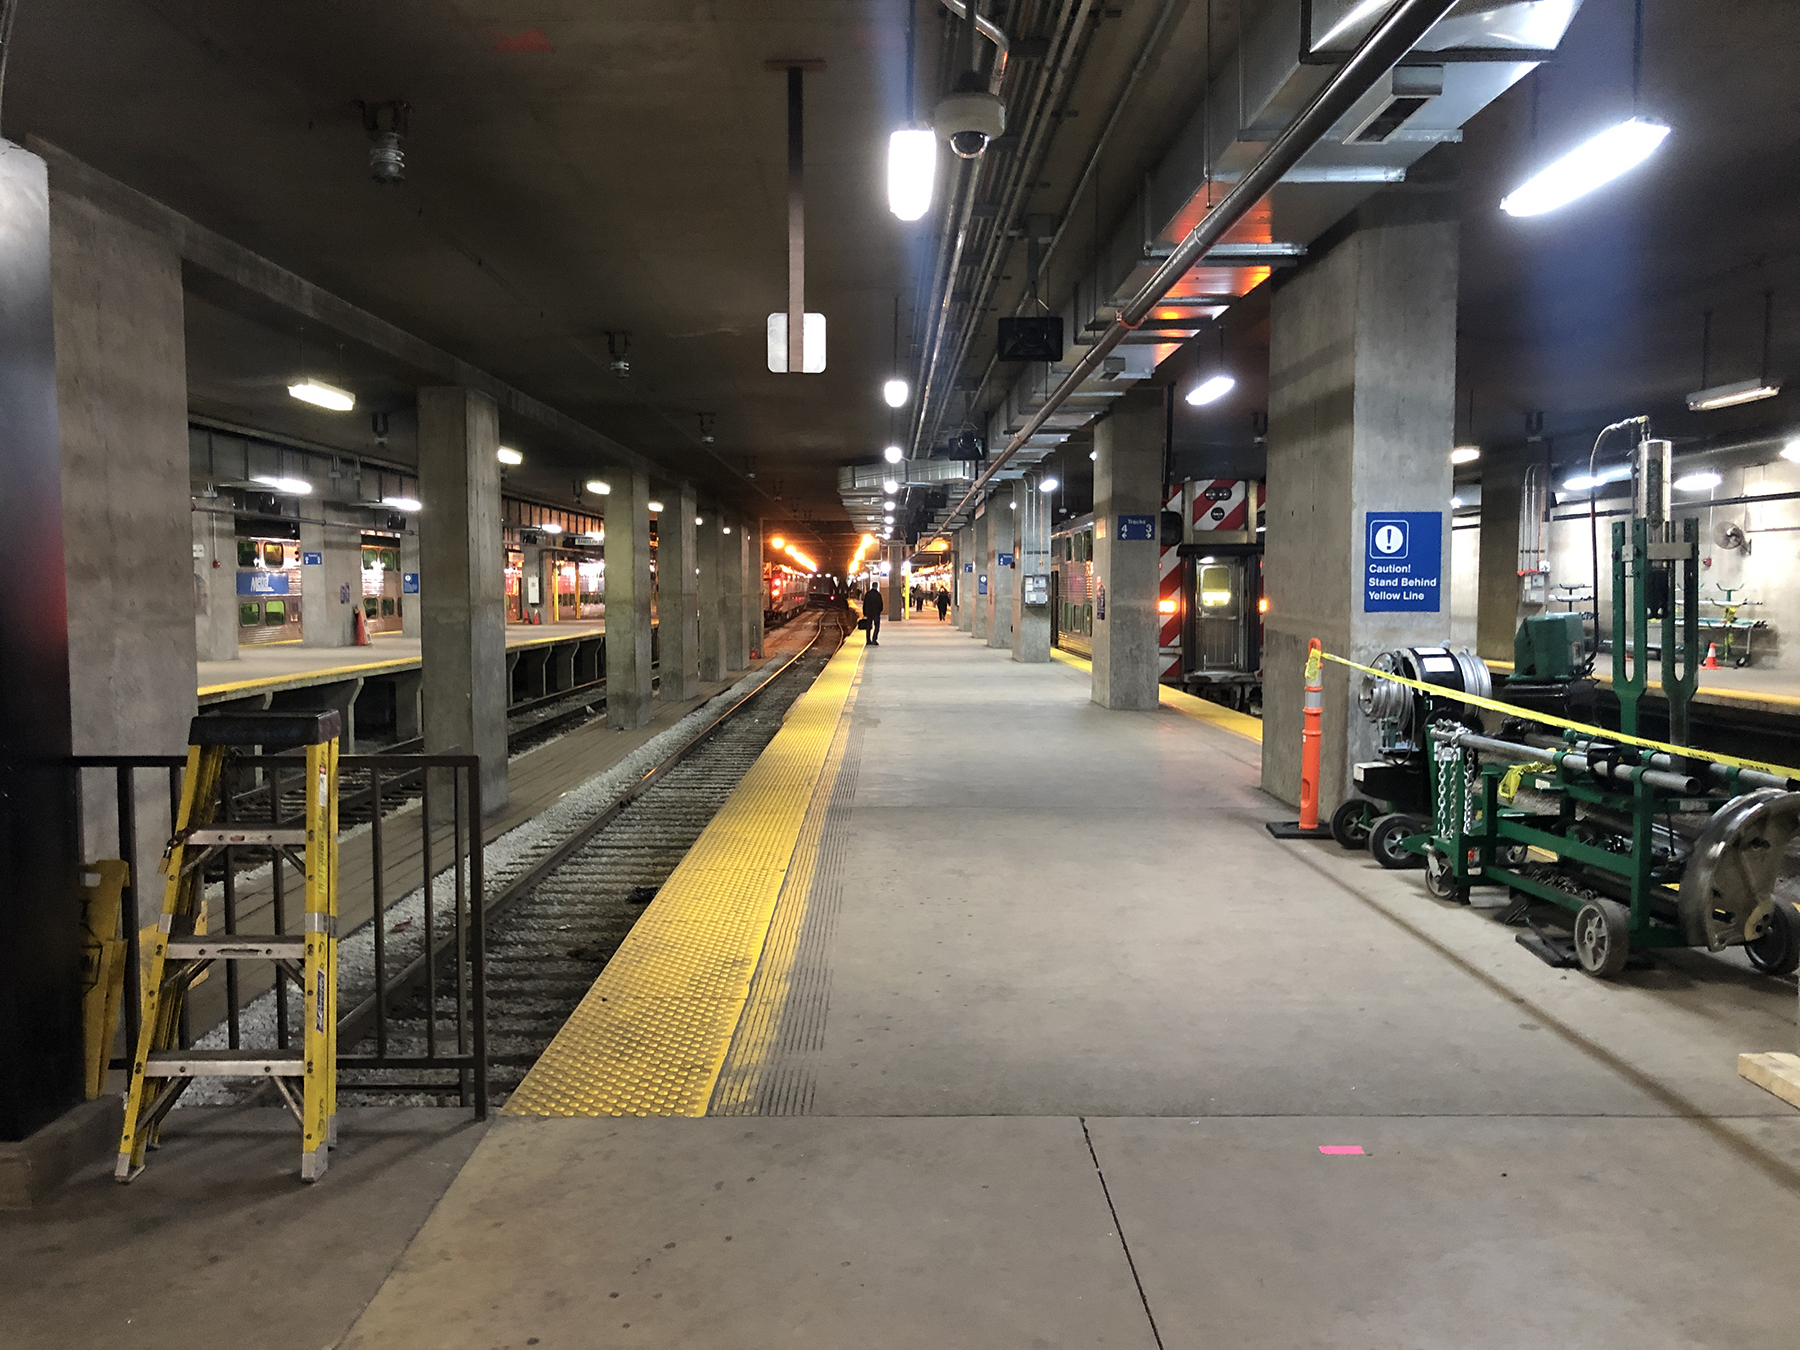 Underground areas, like the Metra Electric train platforms in Chicago’s Millennium Station, can feel the effects of urban heat islands. New research shows that heat can cause displacements above 10 mm in some places, which could be problematic for some infrastructure. (Image courtesy of Aaron Volkening/Flickr) 